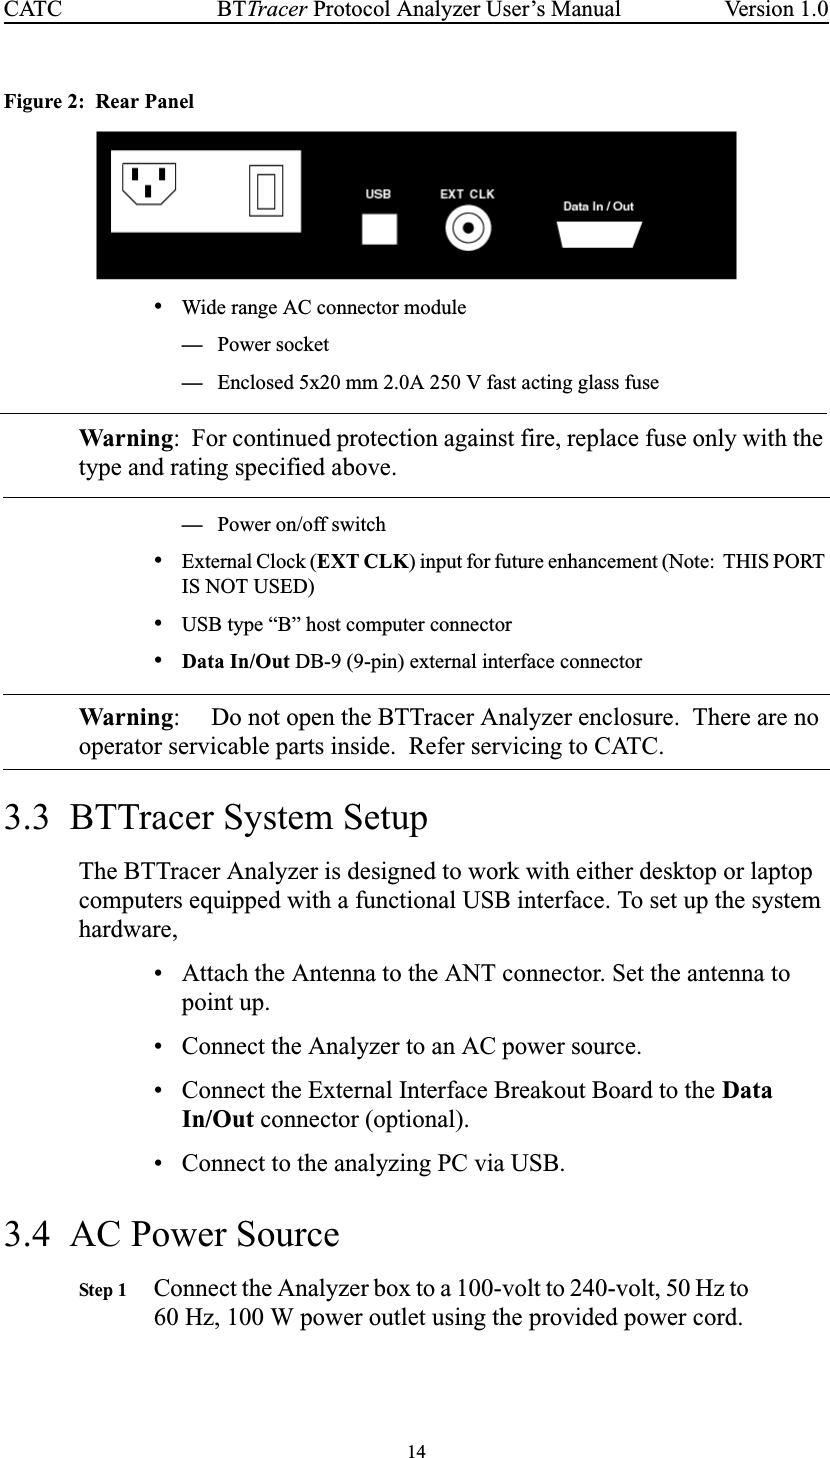 14BTTracer Protocol Analyzer User’s ManualCATC Version 1.0Figure 2: Rear Panel•Wide range AC connector module—Power socket—Enclosed 5x20 mm 2.0A 250 V fast acting glass fuseWarning: For continued protection against fire, replace fuse only with thetype and rating specified above.—Power on/off switch•External Clock (EXT CLK) input for future enhancement (Note: THIS PORTIS NOT USED)•USB type “B” host computer connector•Data In/Out DB-9 (9-pin) external interface connectorWarning: Do not open the BTTracer Analyzer enclosure. There are nooperator servicable parts inside. Refer servicing to CATC.3.3 BTTracer System SetupThe BTTracer Analyzer is designed to work with either desktop or laptopcomputers equipped with a functional USB interface. To set up the systemhardware,• Attach the Antenna to the ANT connector. Set the antenna topoint up.• Connect the Analyzer to an AC power source.• Connect the External Interface Breakout Board to the DataIn/Out connector (optional).• Connect to the analyzing PC via USB.3.4 AC Power SourceStep 1 Connect the Analyzer box to a 100-volt to 240-volt, 50 Hz to60 Hz, 100 W power outlet using the provided power cord.